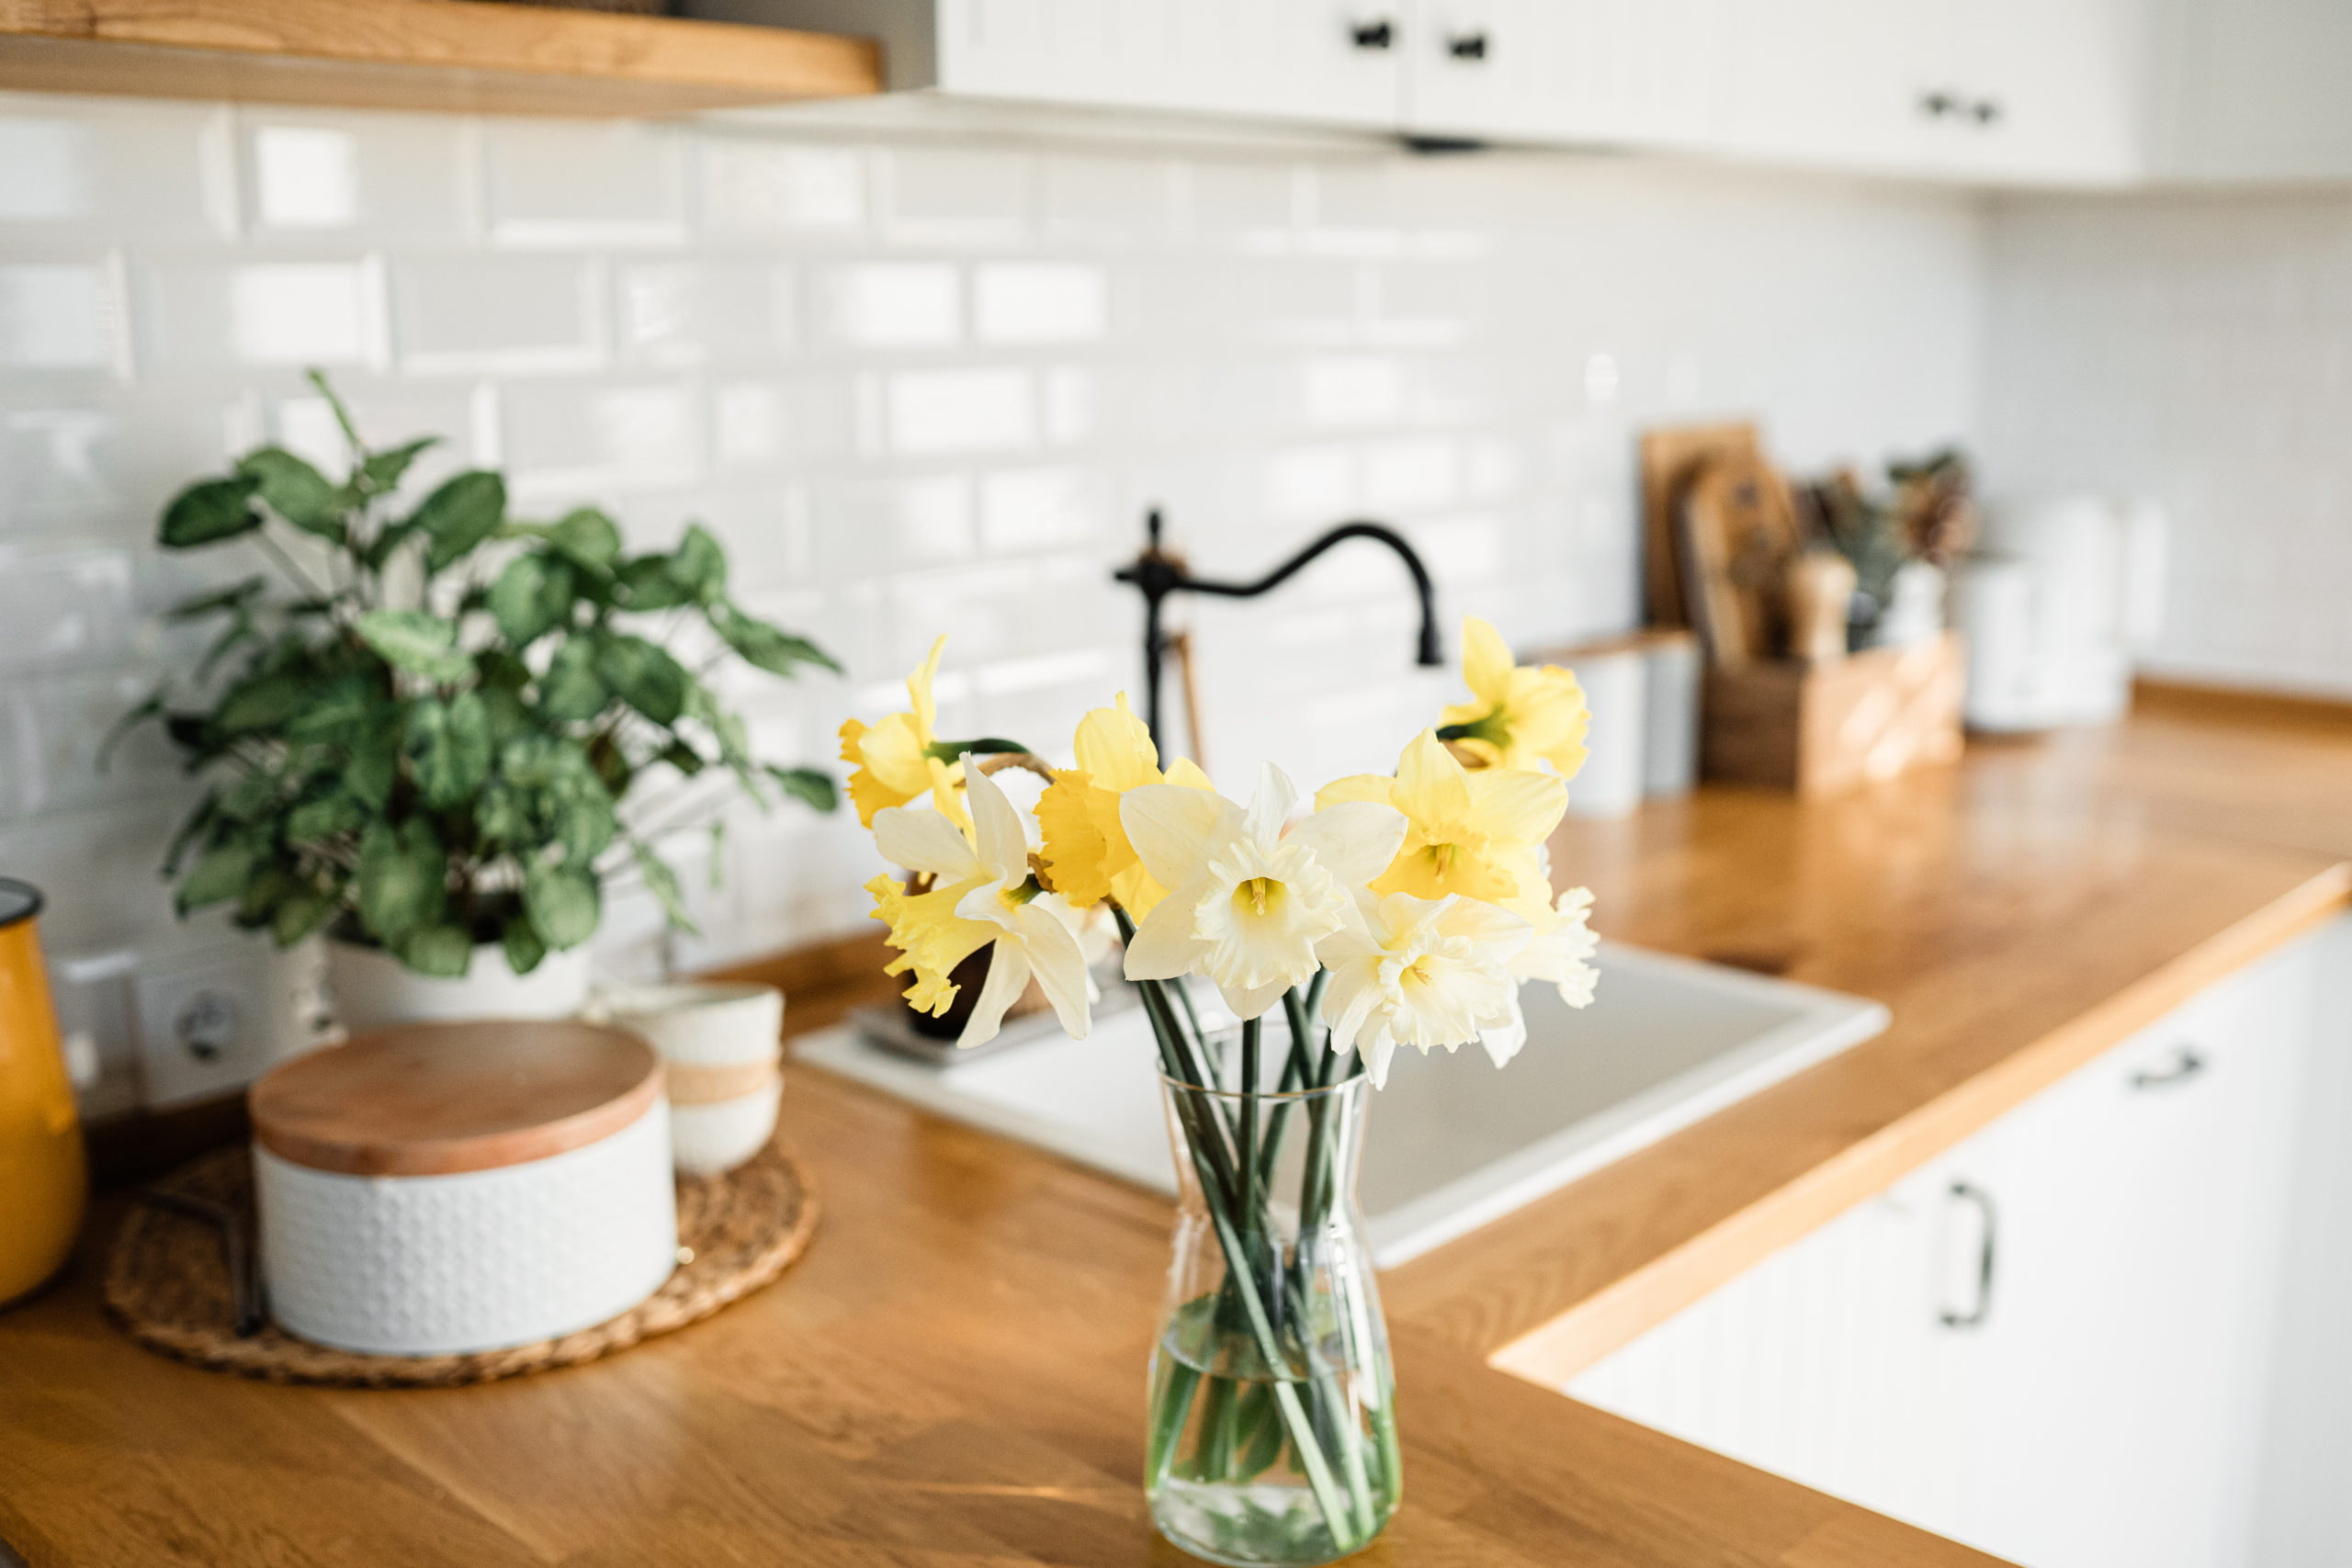 Spring Cleaning Your Kitchen (Realistically) | Didn't I Just Feed You podcast